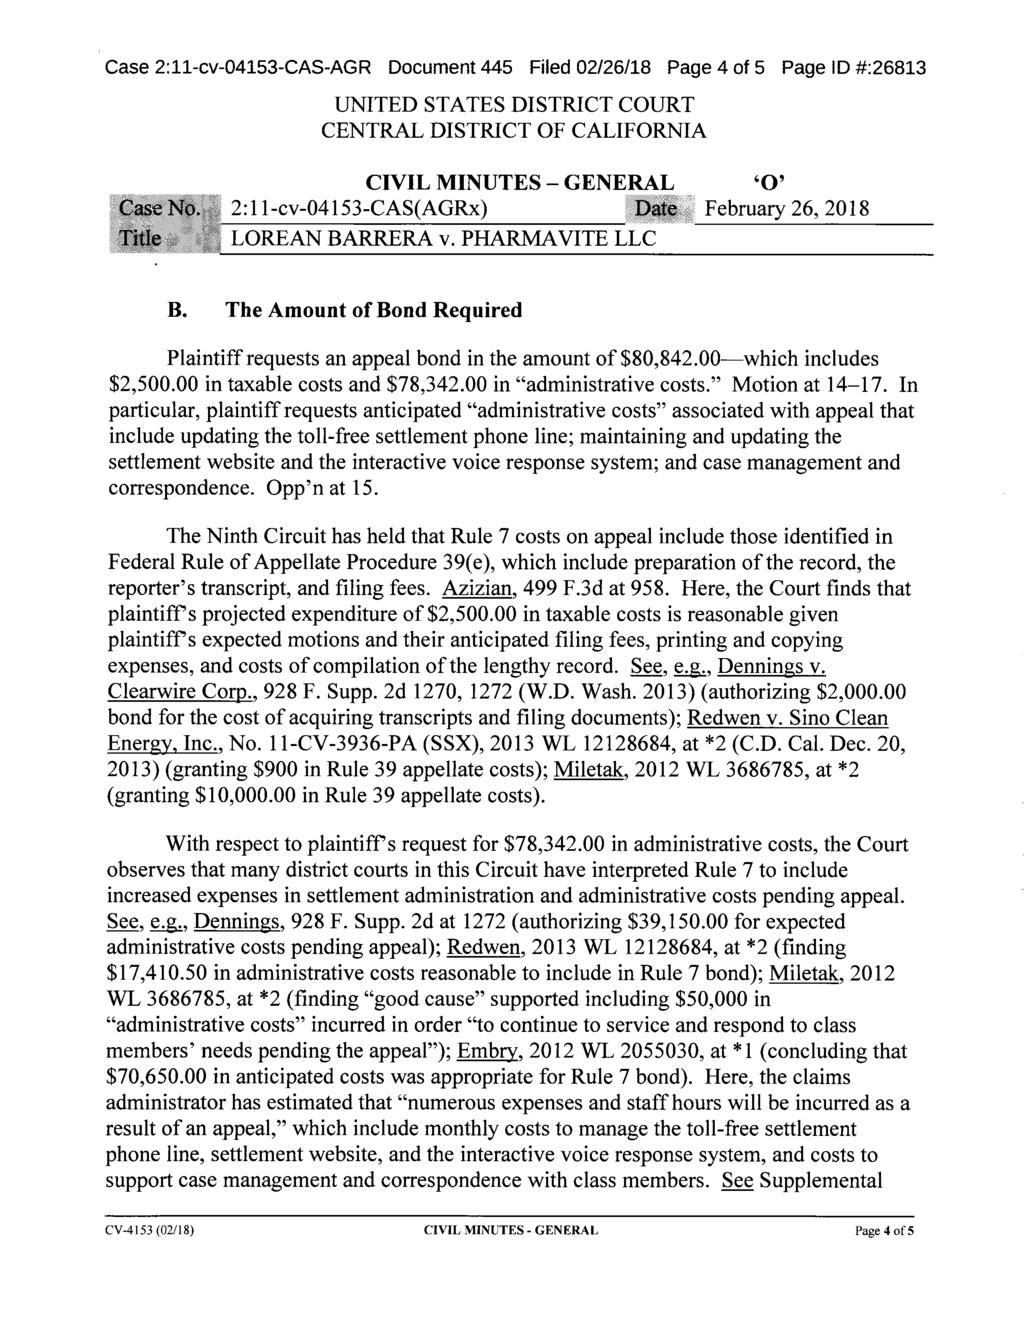 Case 2:11-cv-04153-CAS-AGR Document 448 Filed 03/07/18 Page 8 of 9 Page ID #:26823 Case 2:11-cv-04153-CAS-AGR Document 445 Filed 02/26/18 Page 4 of 5 Page ID #:26813 Gasp No.